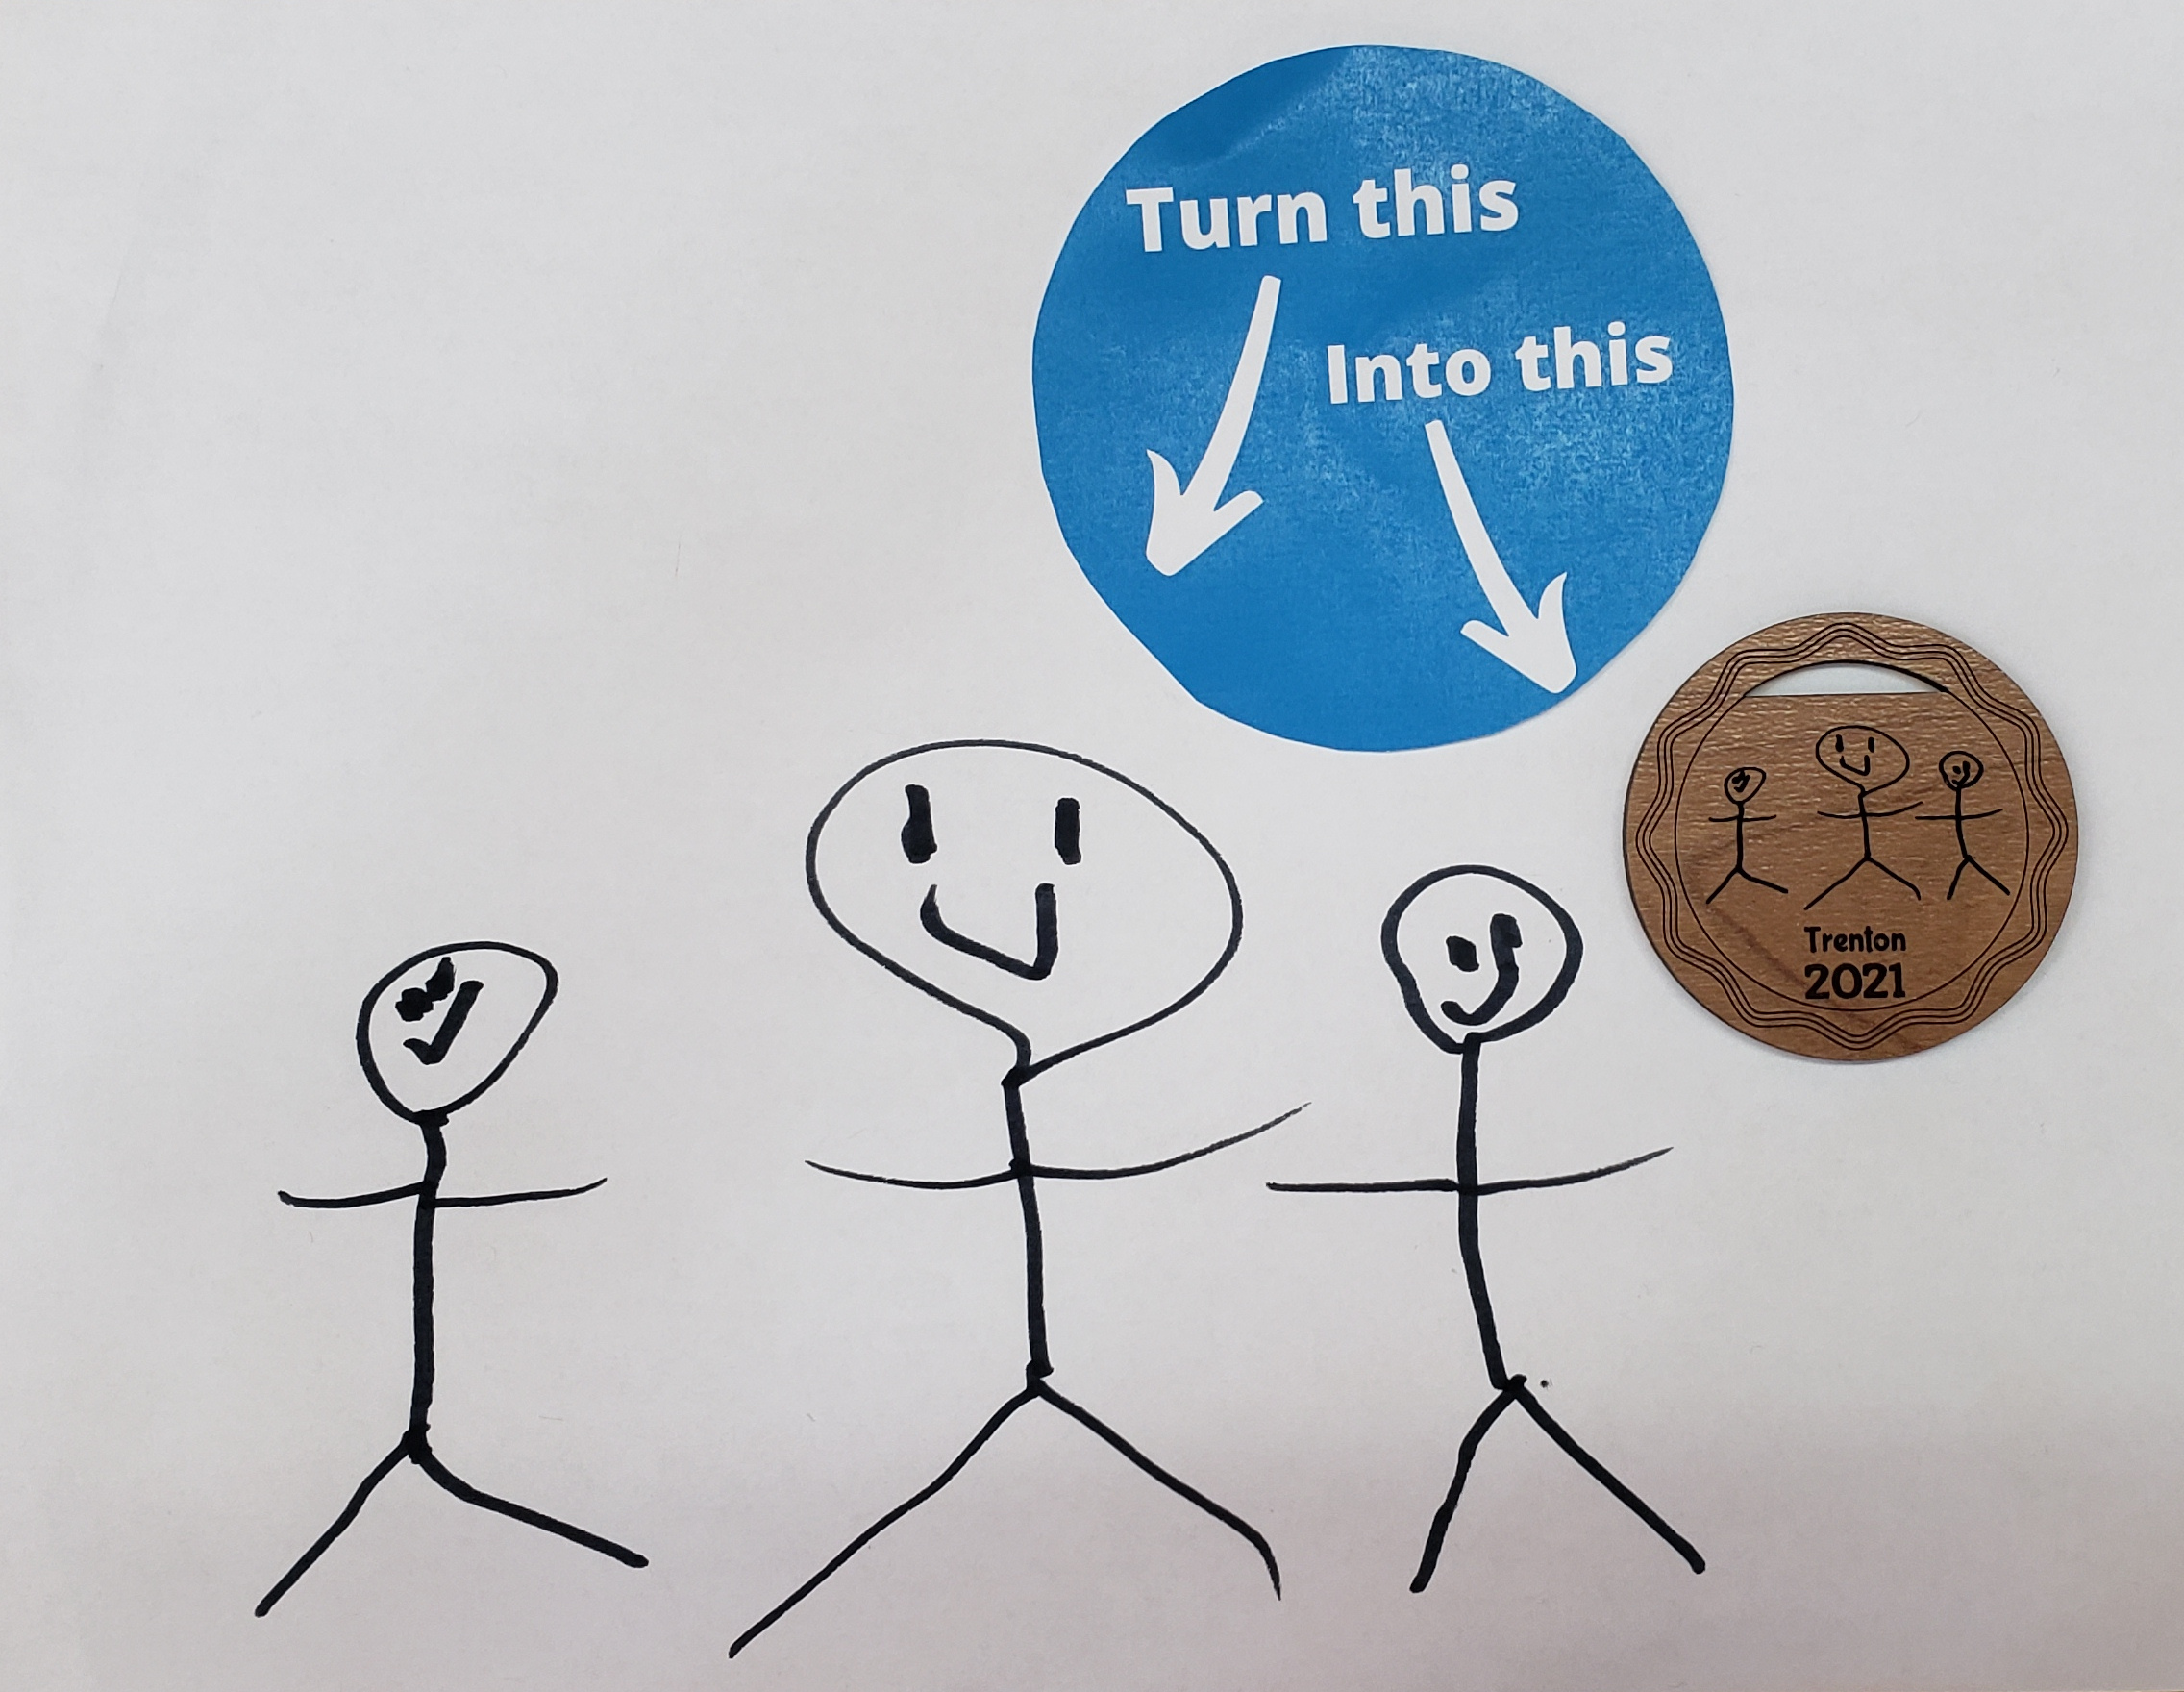 Stick figure drawing and engraved wooden circle with same image shown.  Text says turn this into this